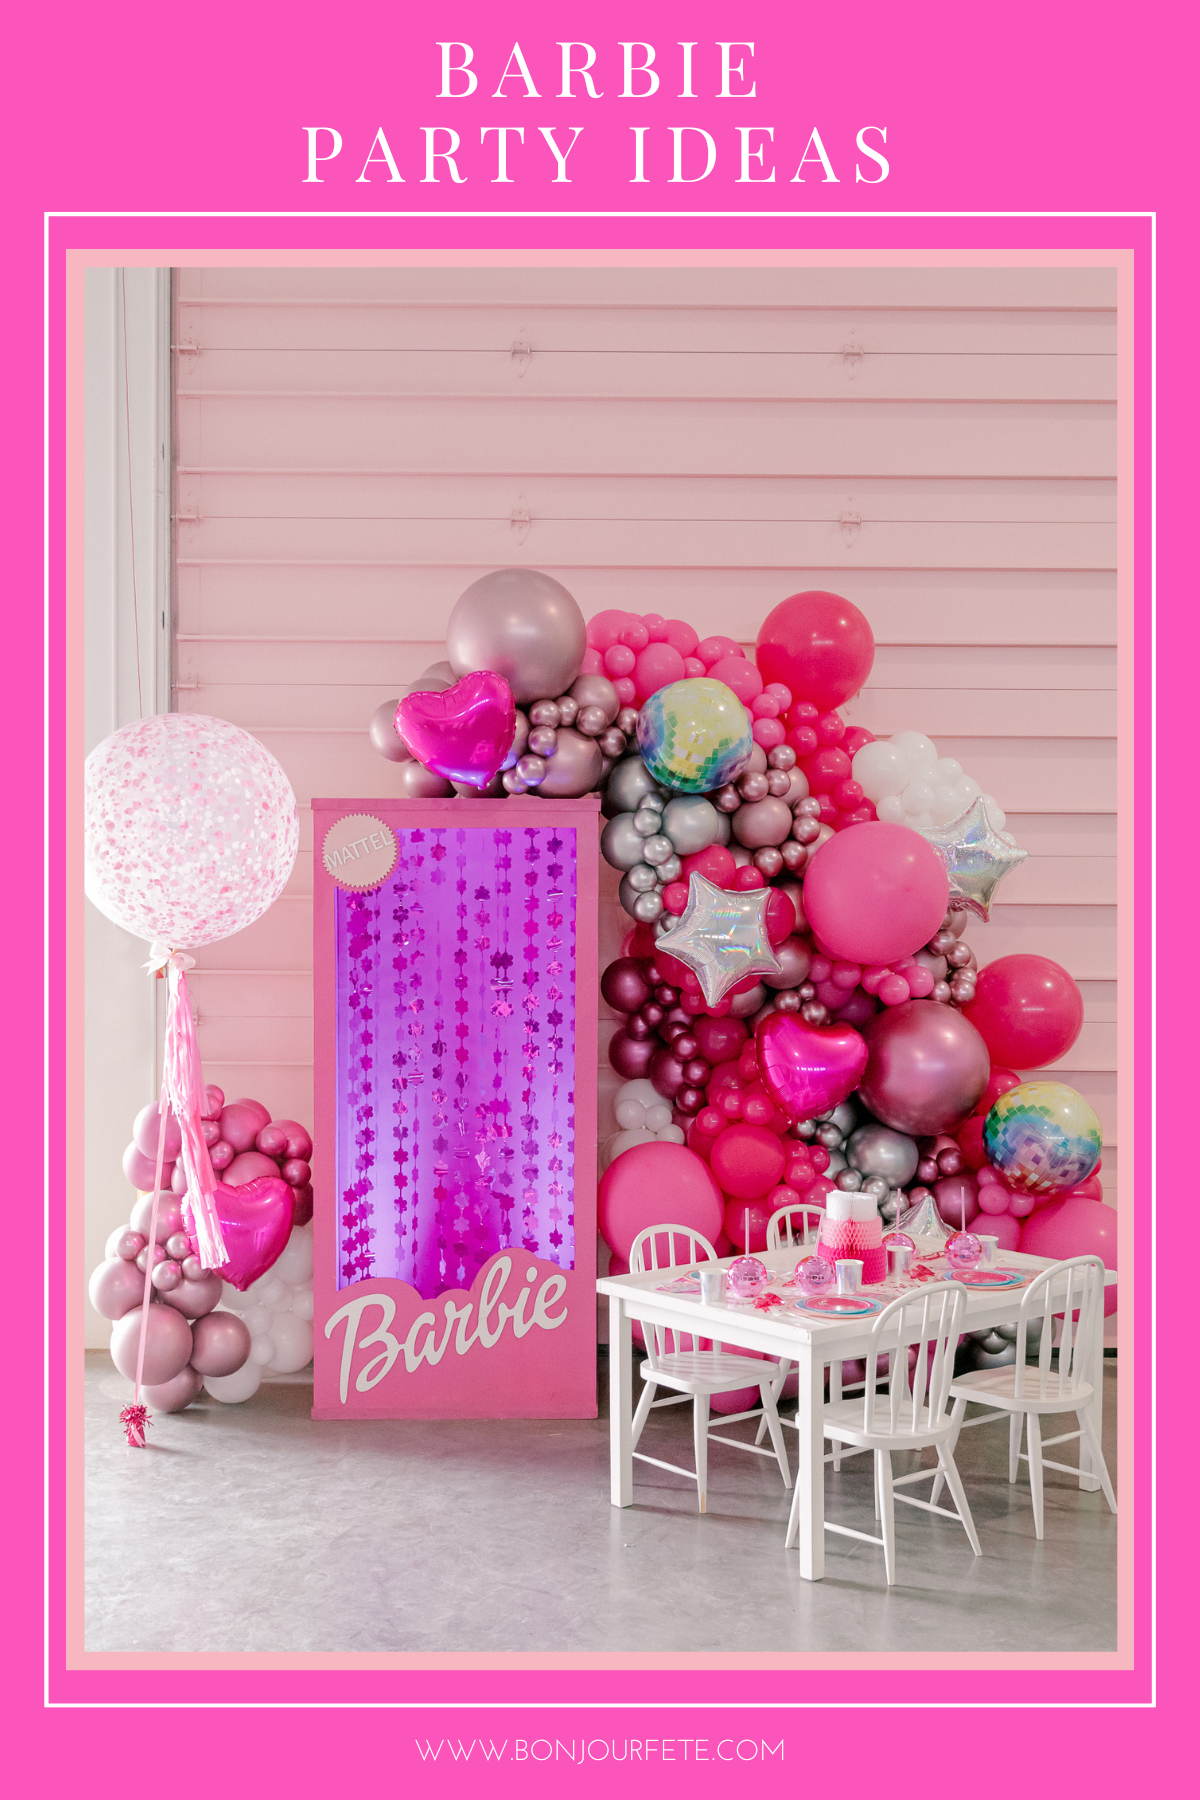 Sprinkle Party Decor - B. Lovely Events